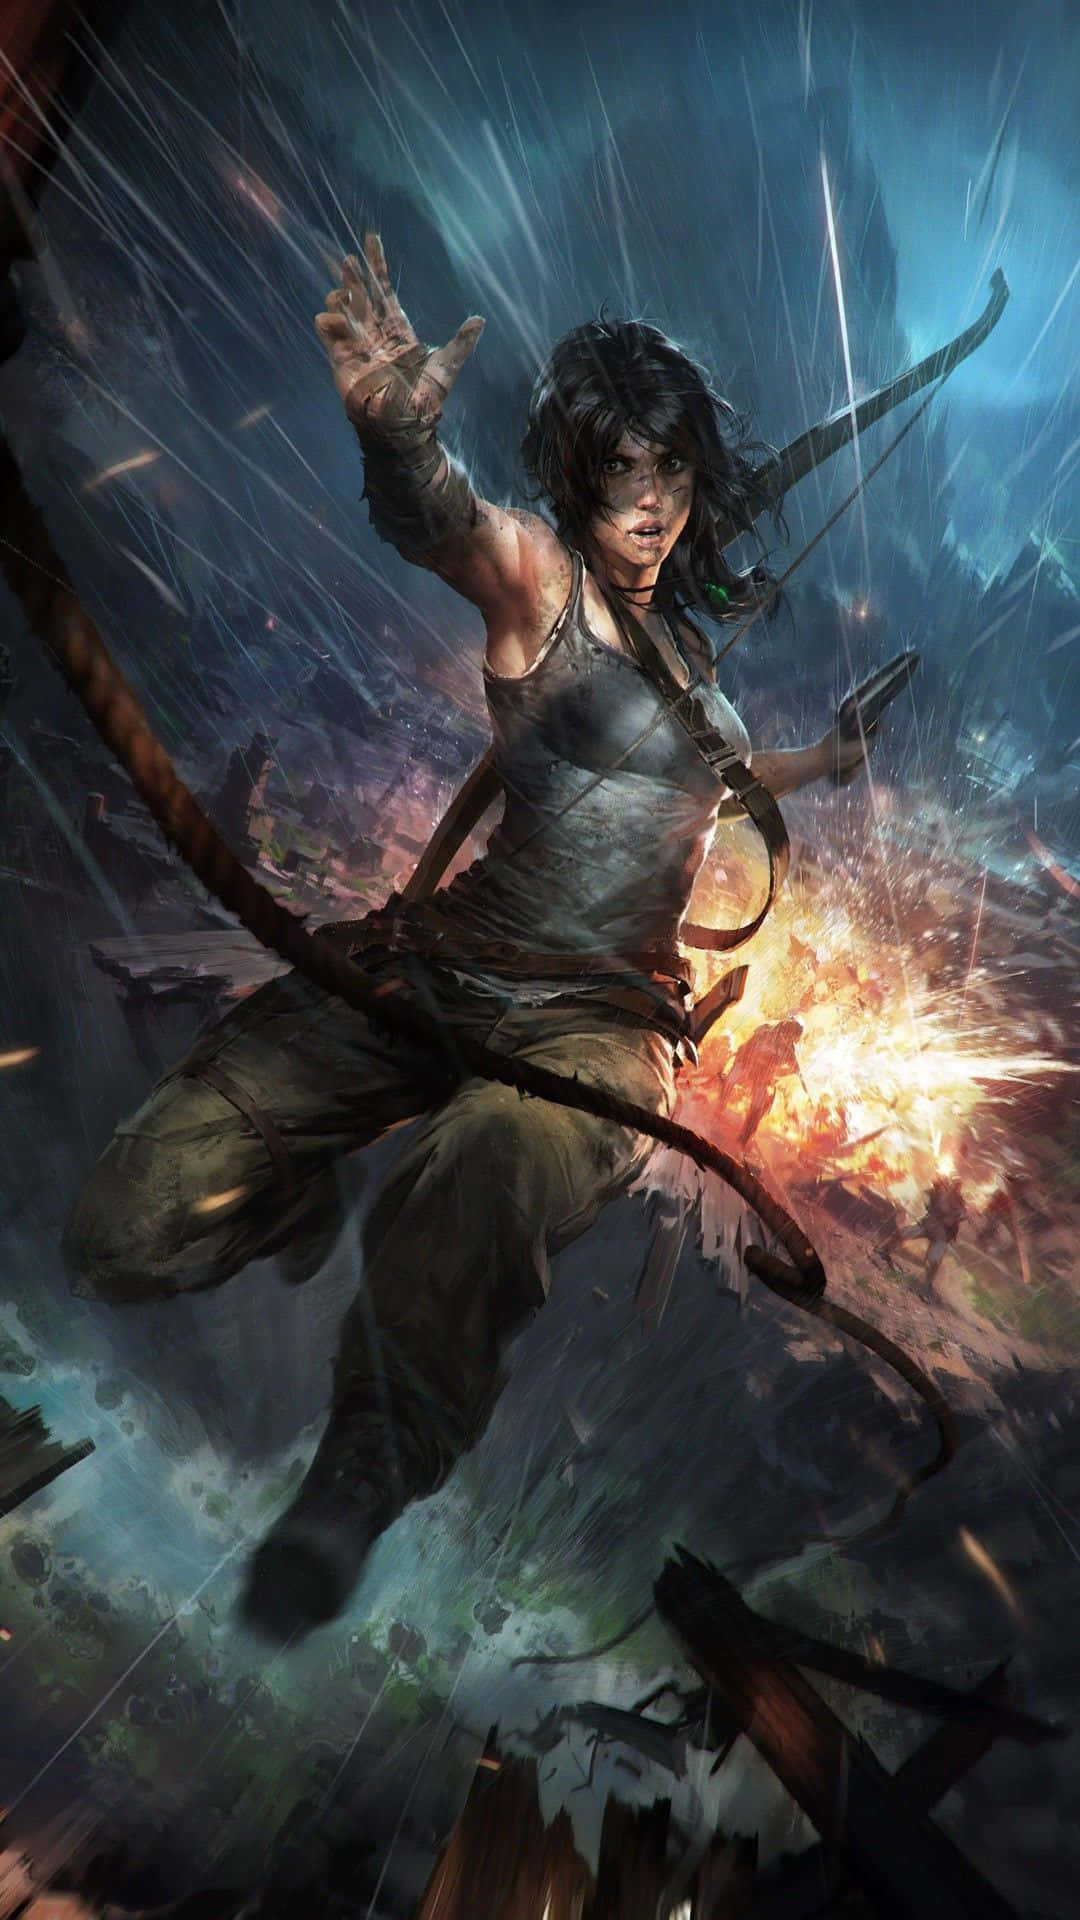 Tomb Raider Phone Wallpaper - Mobile Abyss